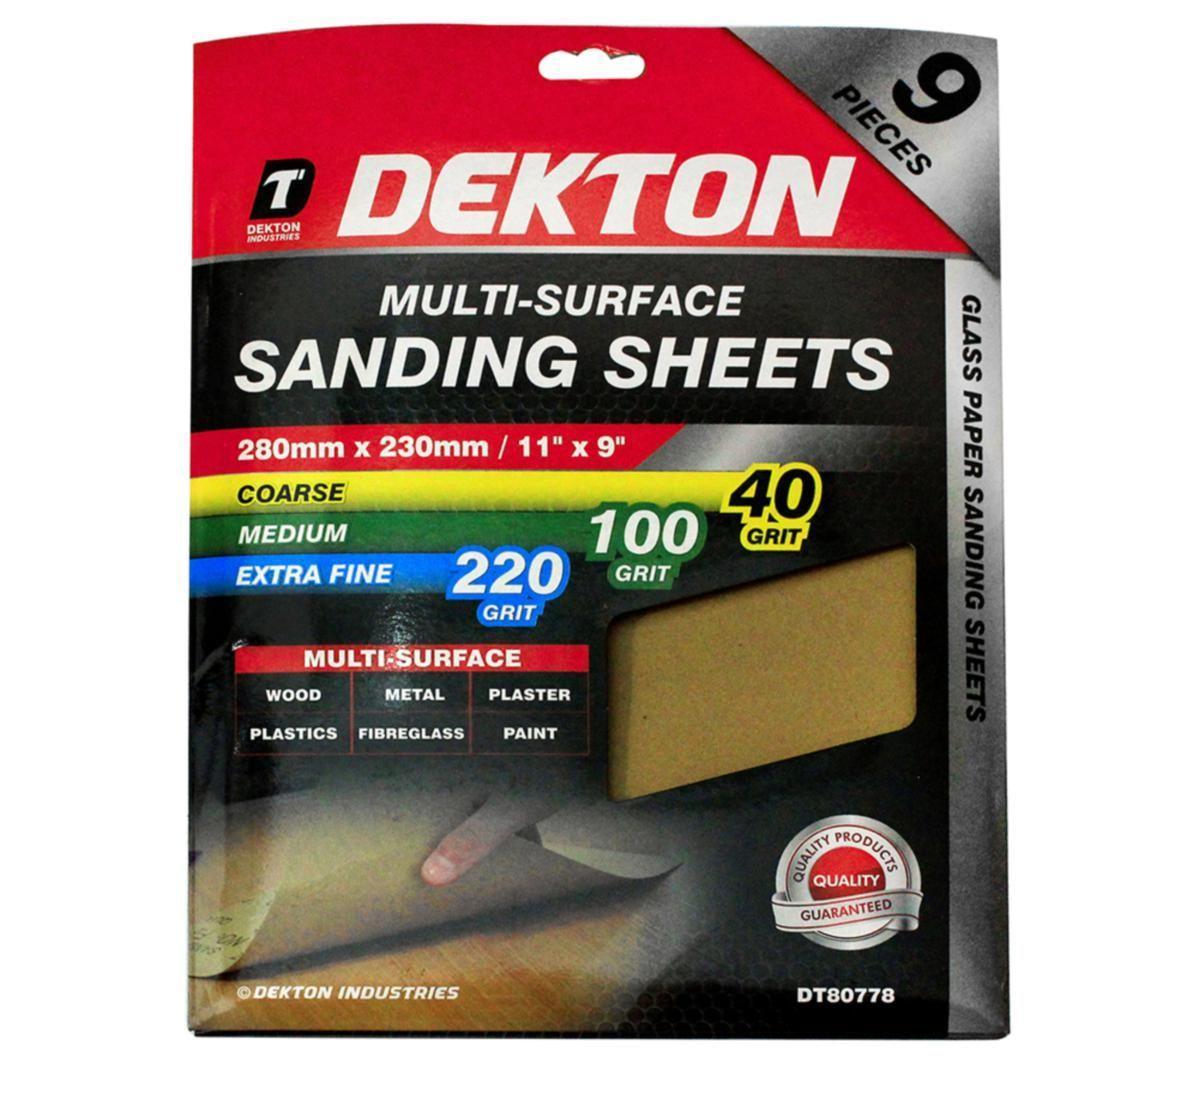 Dekton | Multi-Surface Assorted Sanding Sheets 9 Pack (Coarse, Medium & Extra Fine) DT80778 - Choice Stores